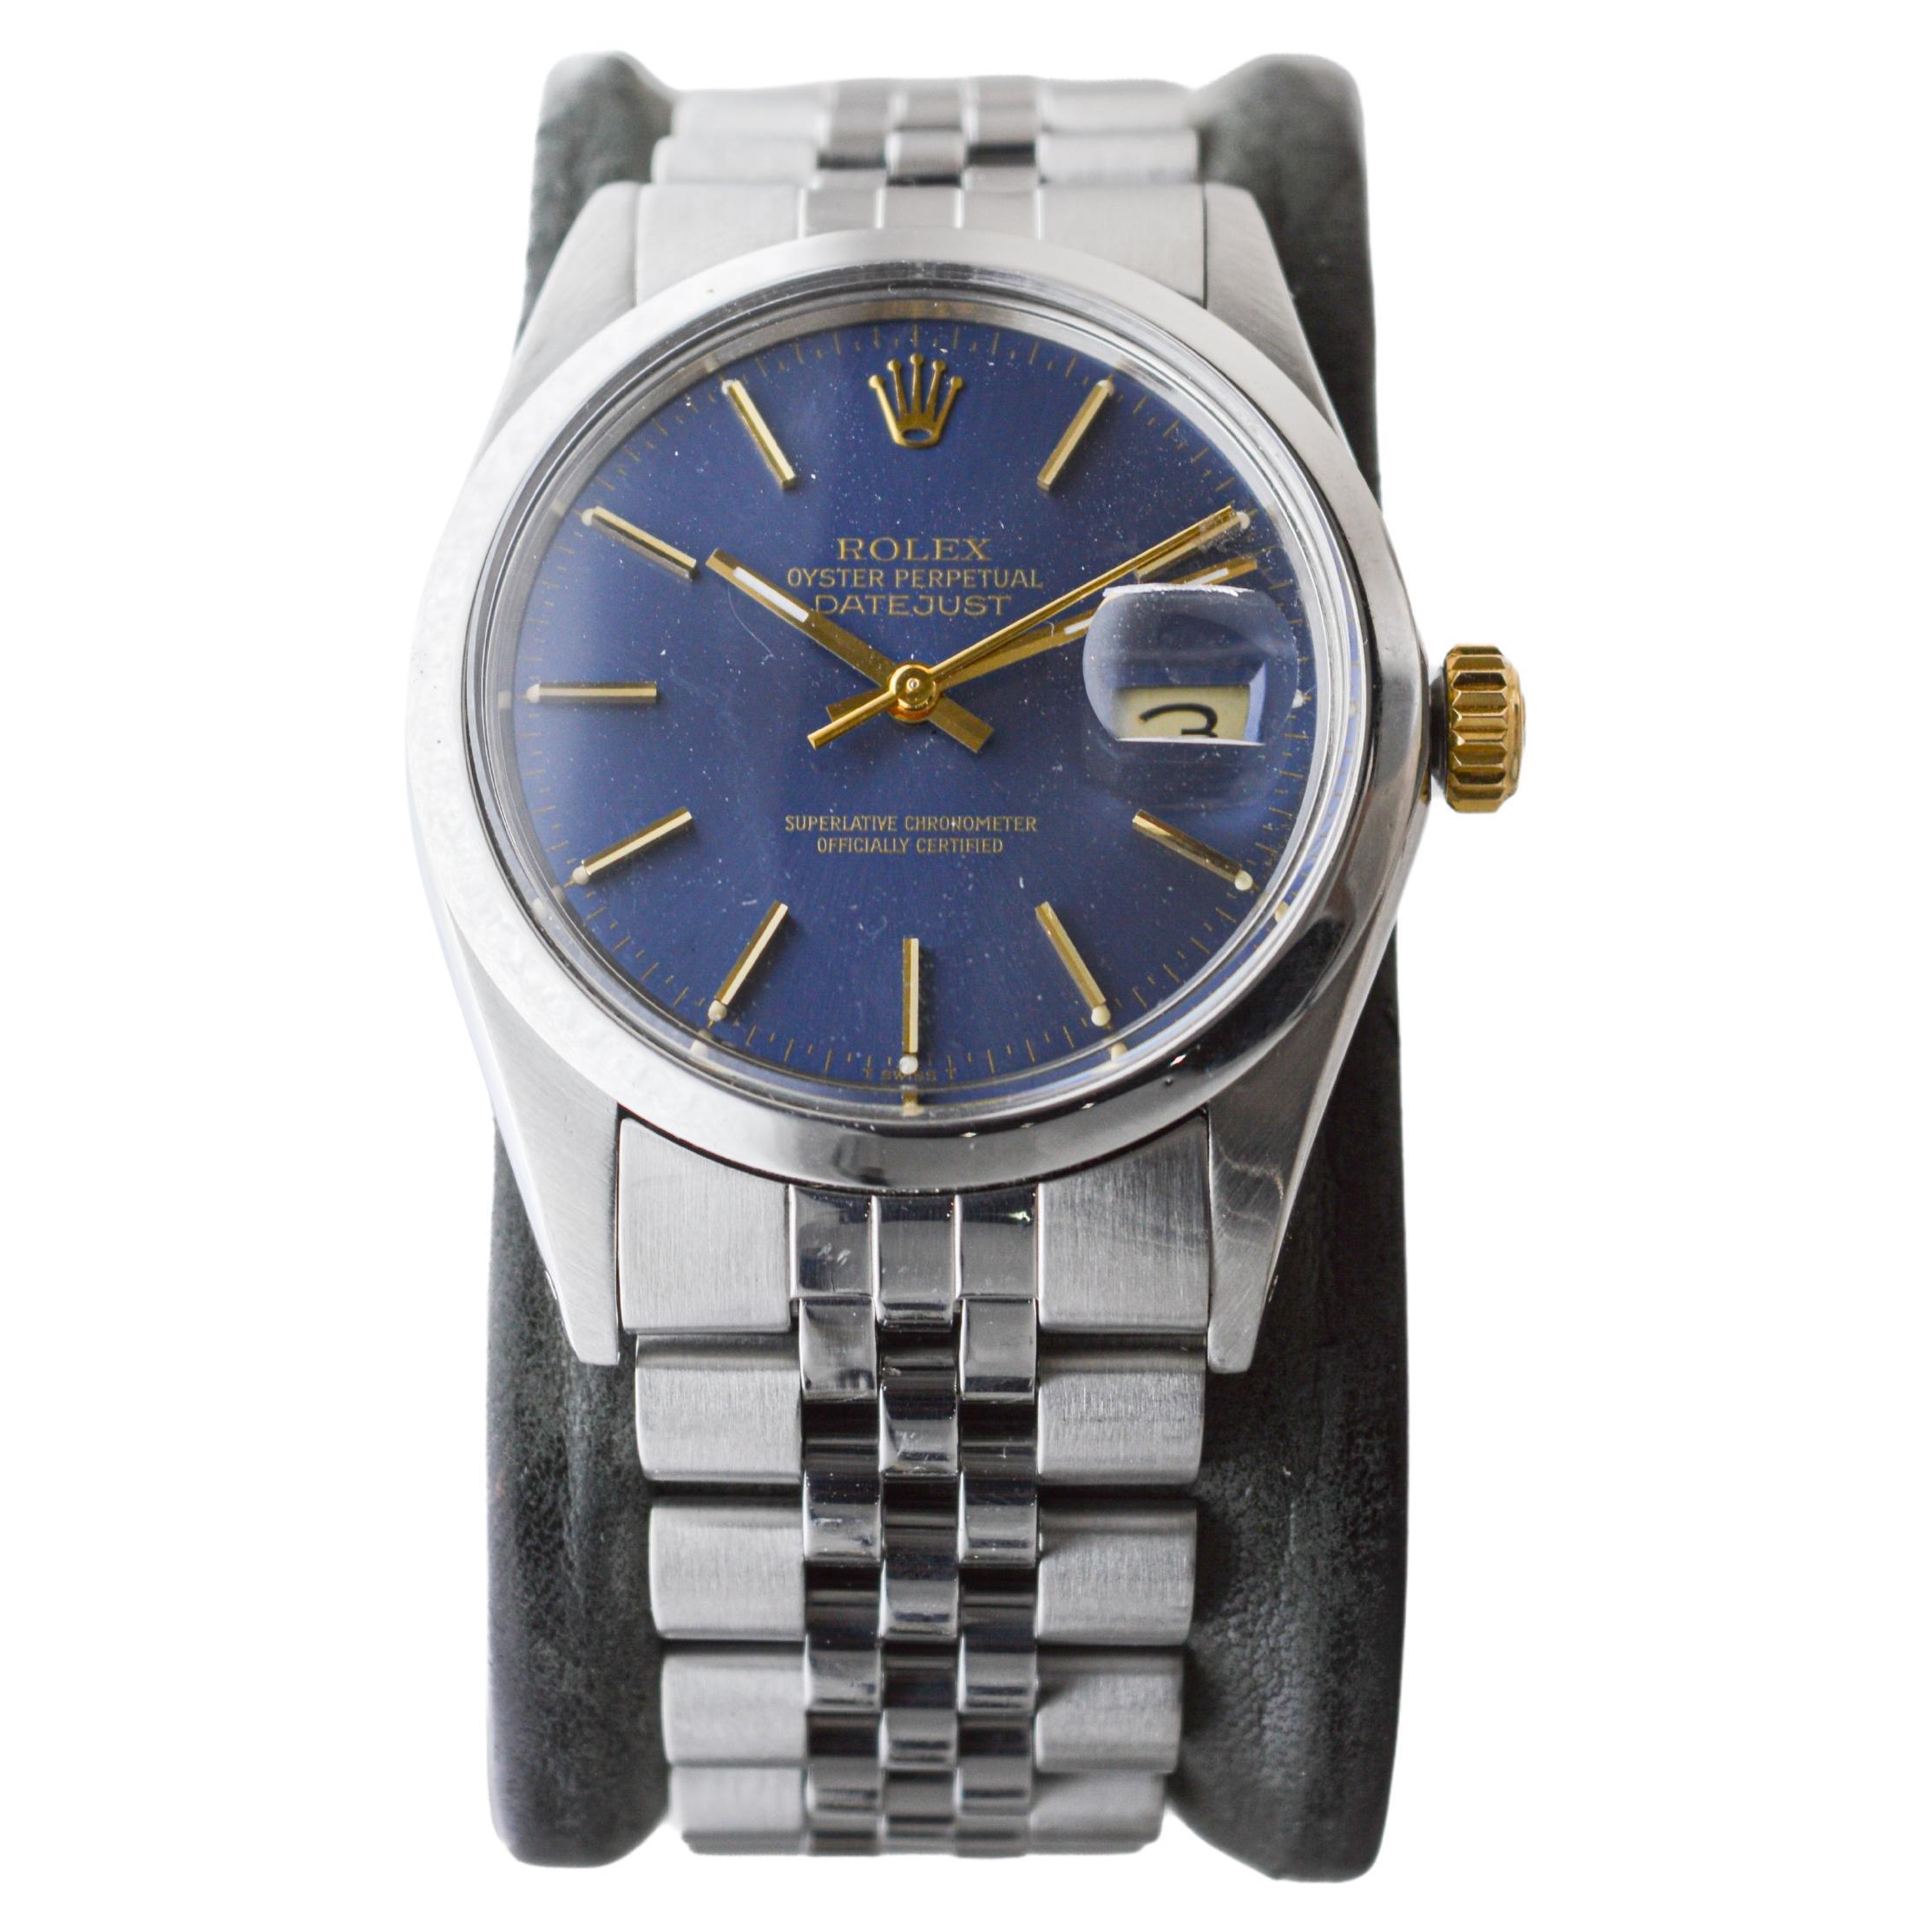 Modern Rolex Steel Oyster Perpetual Datejust with Rare Original Blue Dial from 1987 For Sale